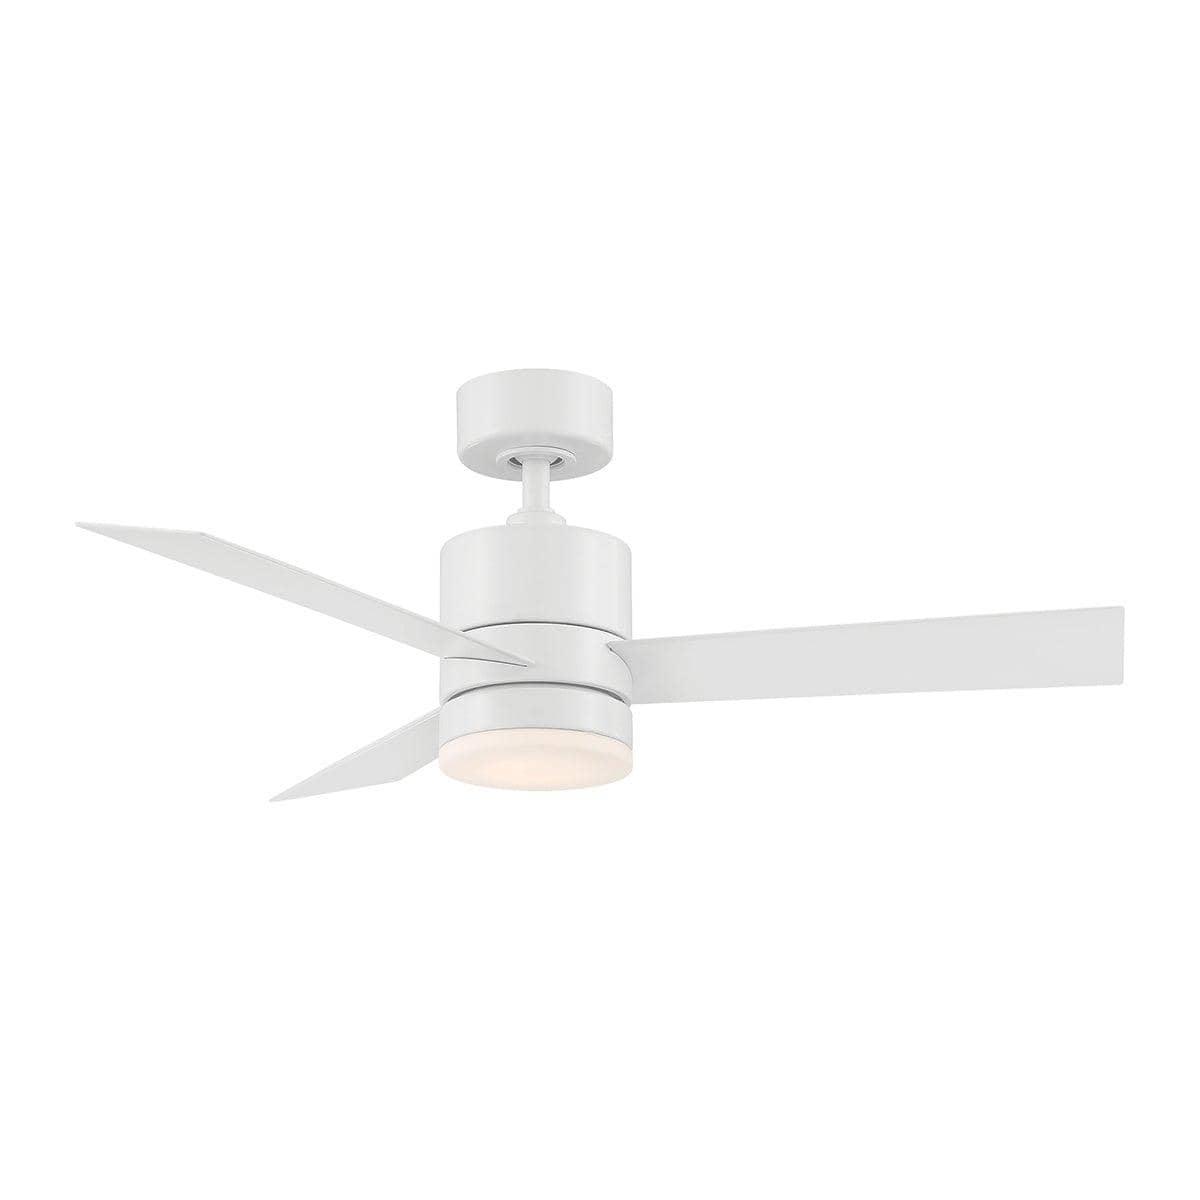 Modern Forms - Axis Ceiling Fan - FR-W1803-44L-35-MW | Montreal Lighting & Hardware